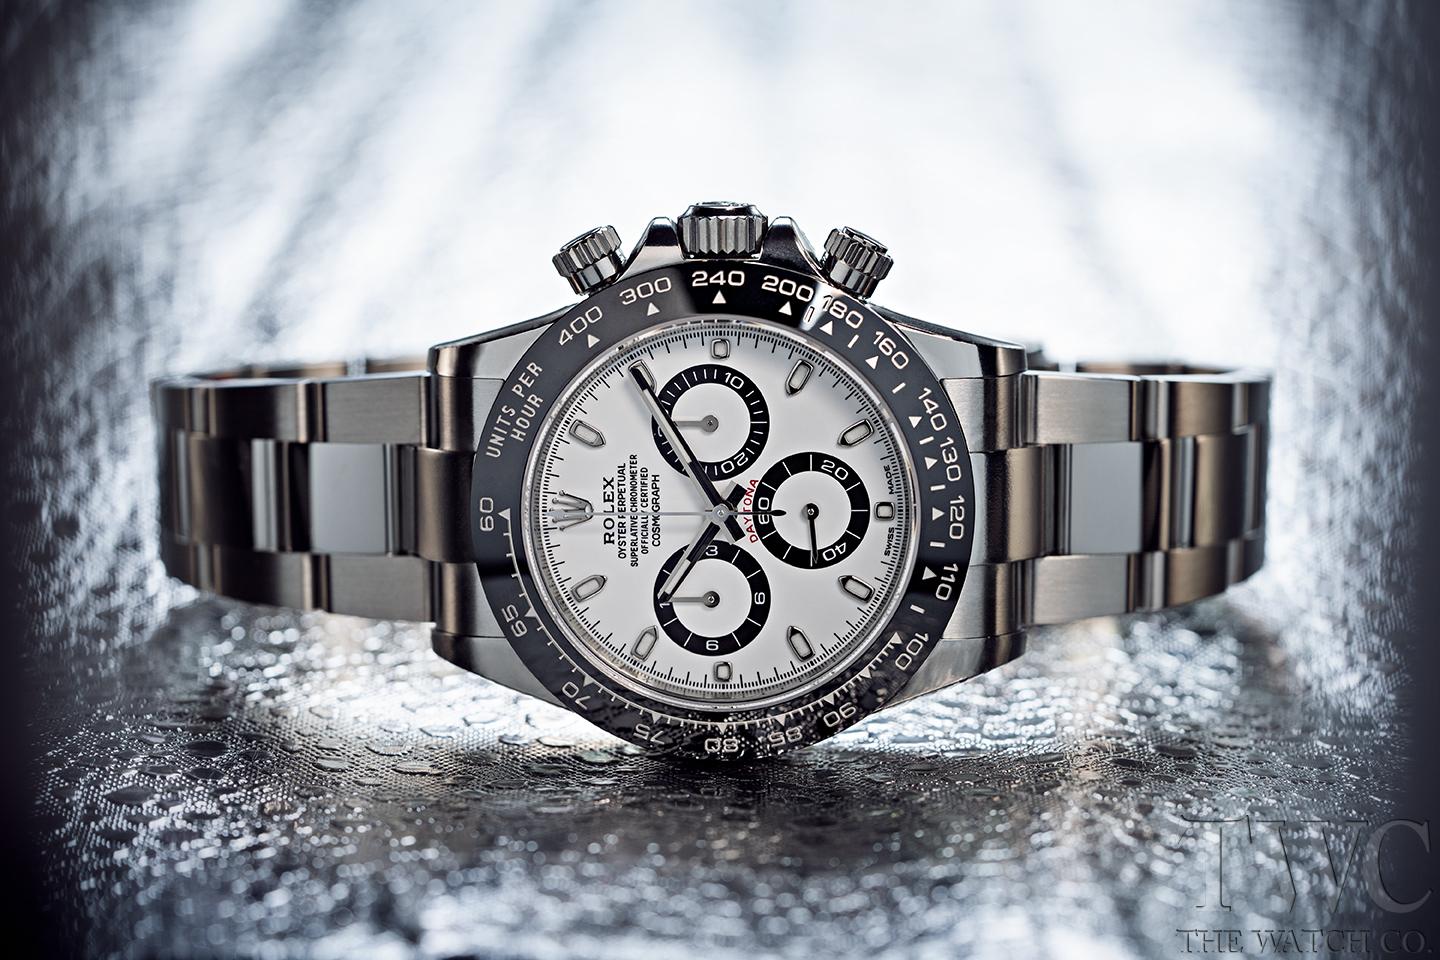 Chronograph Watches - Buy Chronograph Watch Online in India | Myntra